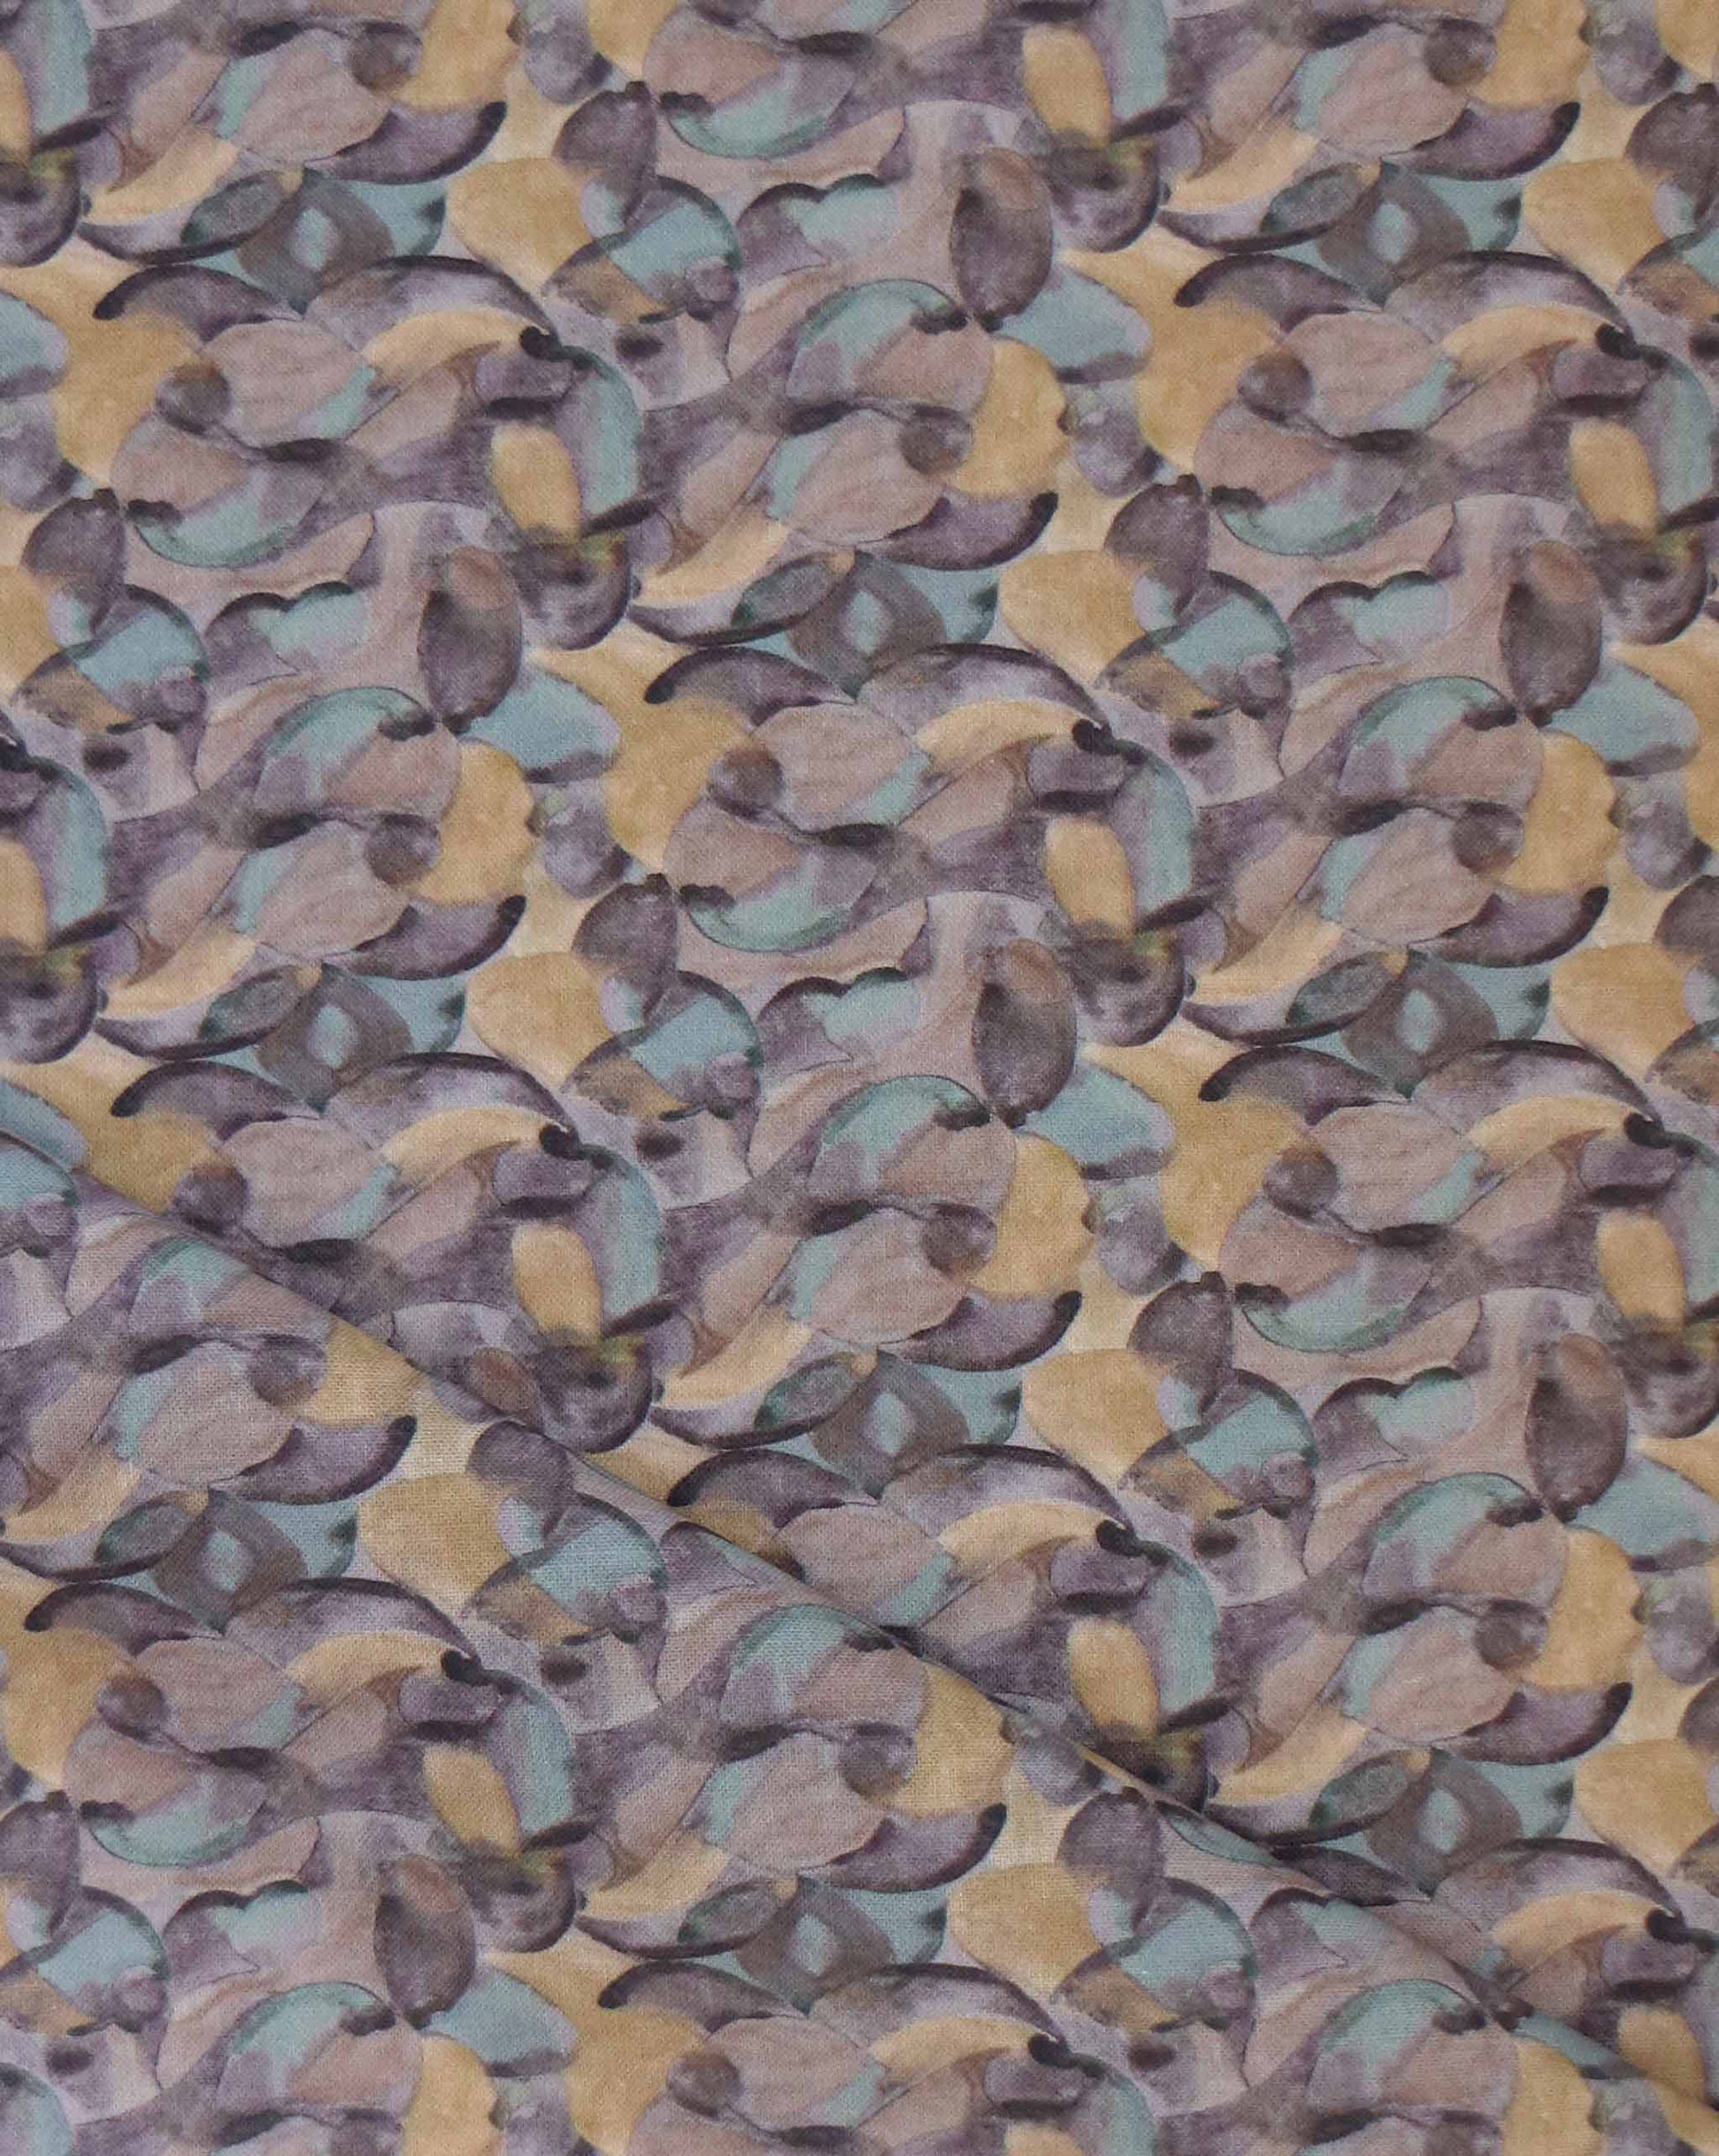 Orbs is an abstract fabric by Eskayel available in the dark multicolor Pebble colorway.